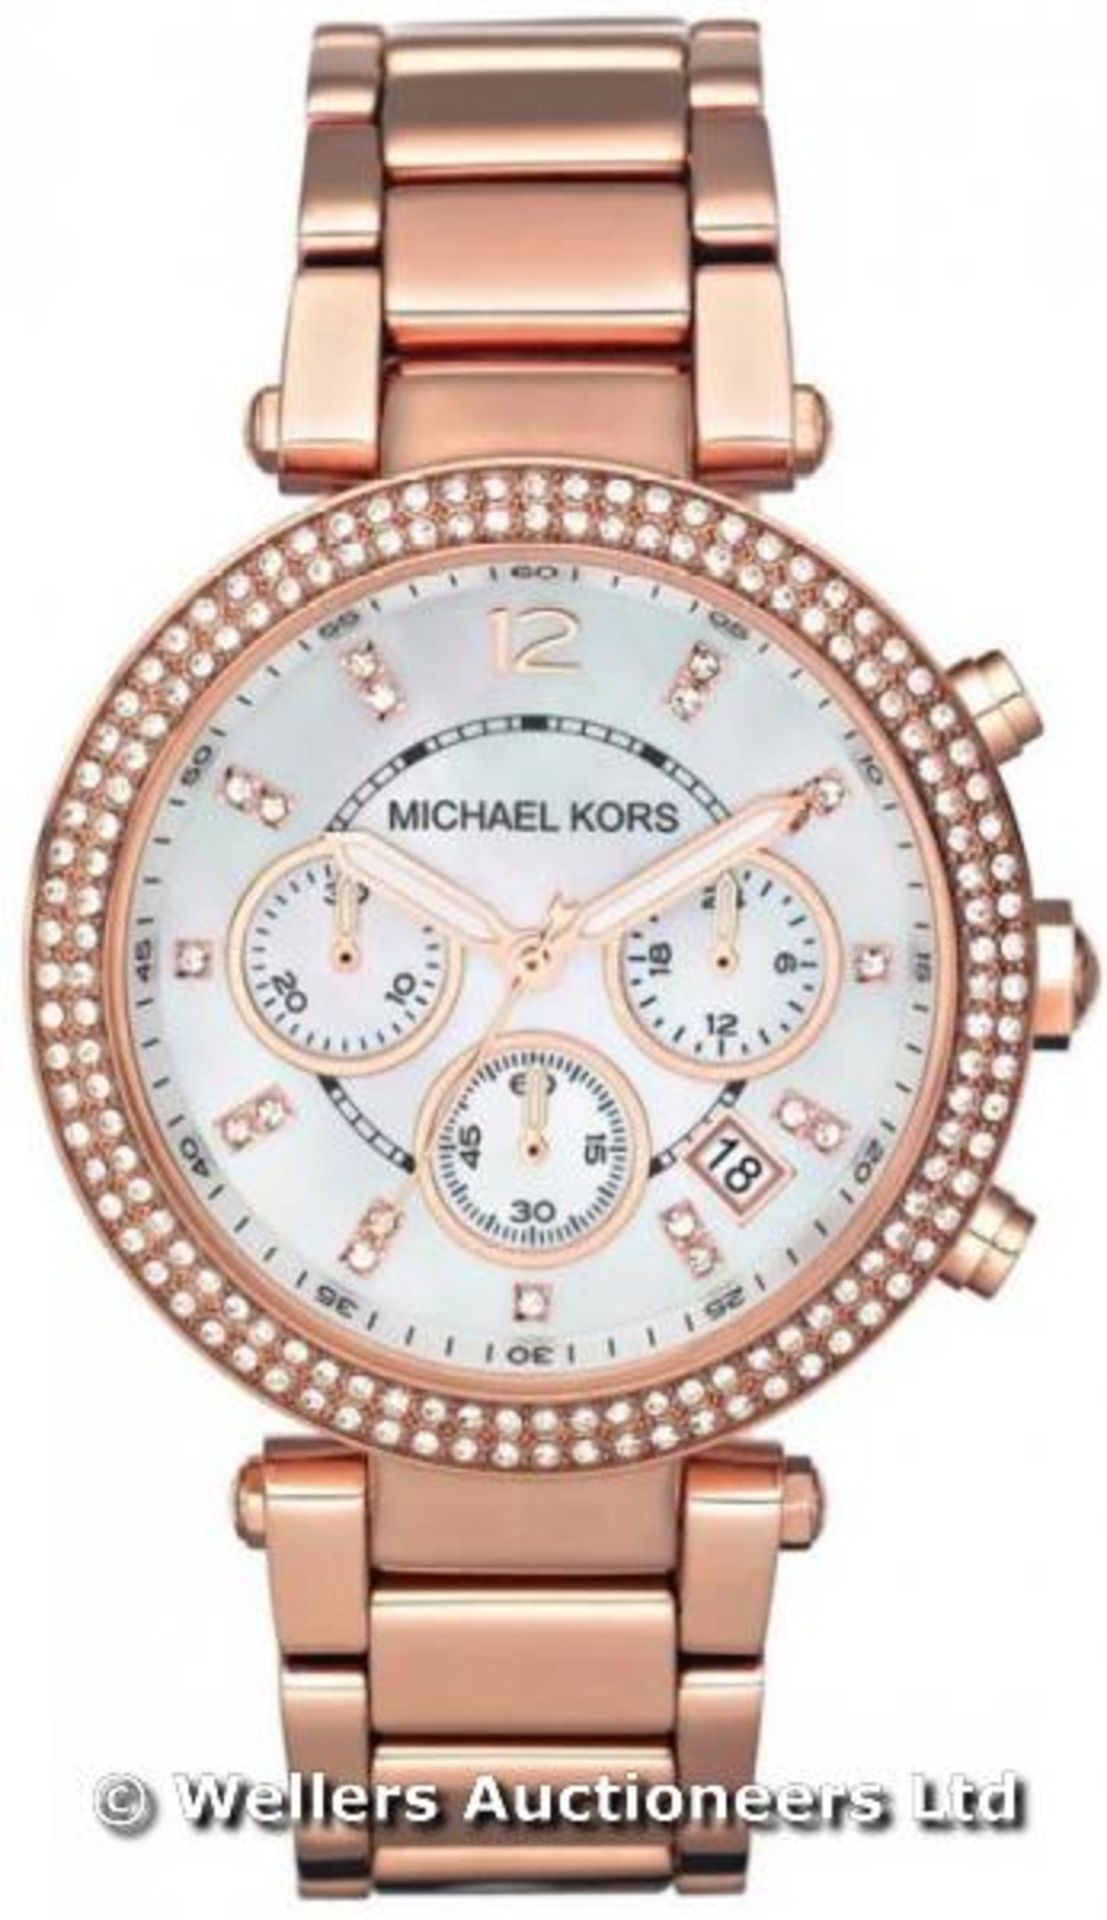 MICHAEL KORS MK5491 PARKER ROSE GOLD LADIES BRACELET WATCH WITH CIRCULAR MOTHER OF PEARL DIAL - RRP: